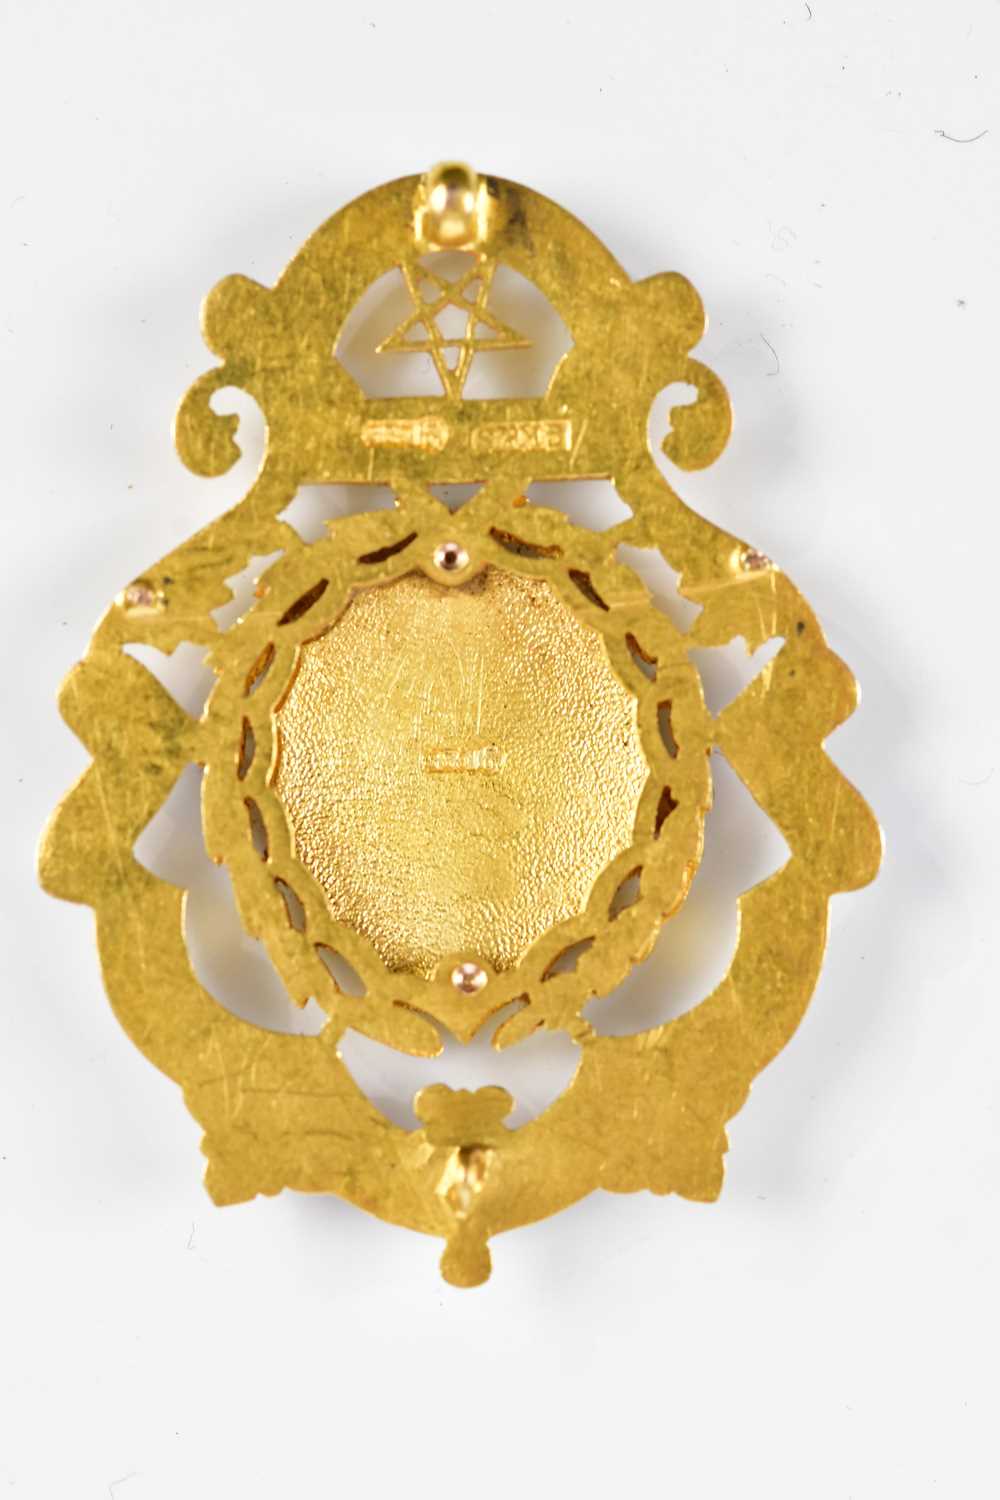 MASONIC INTEREST; a 15ct yellow gold and enamel jewel 'Prince Arthur Lodge No. 4508 Manchester', - Image 2 of 3